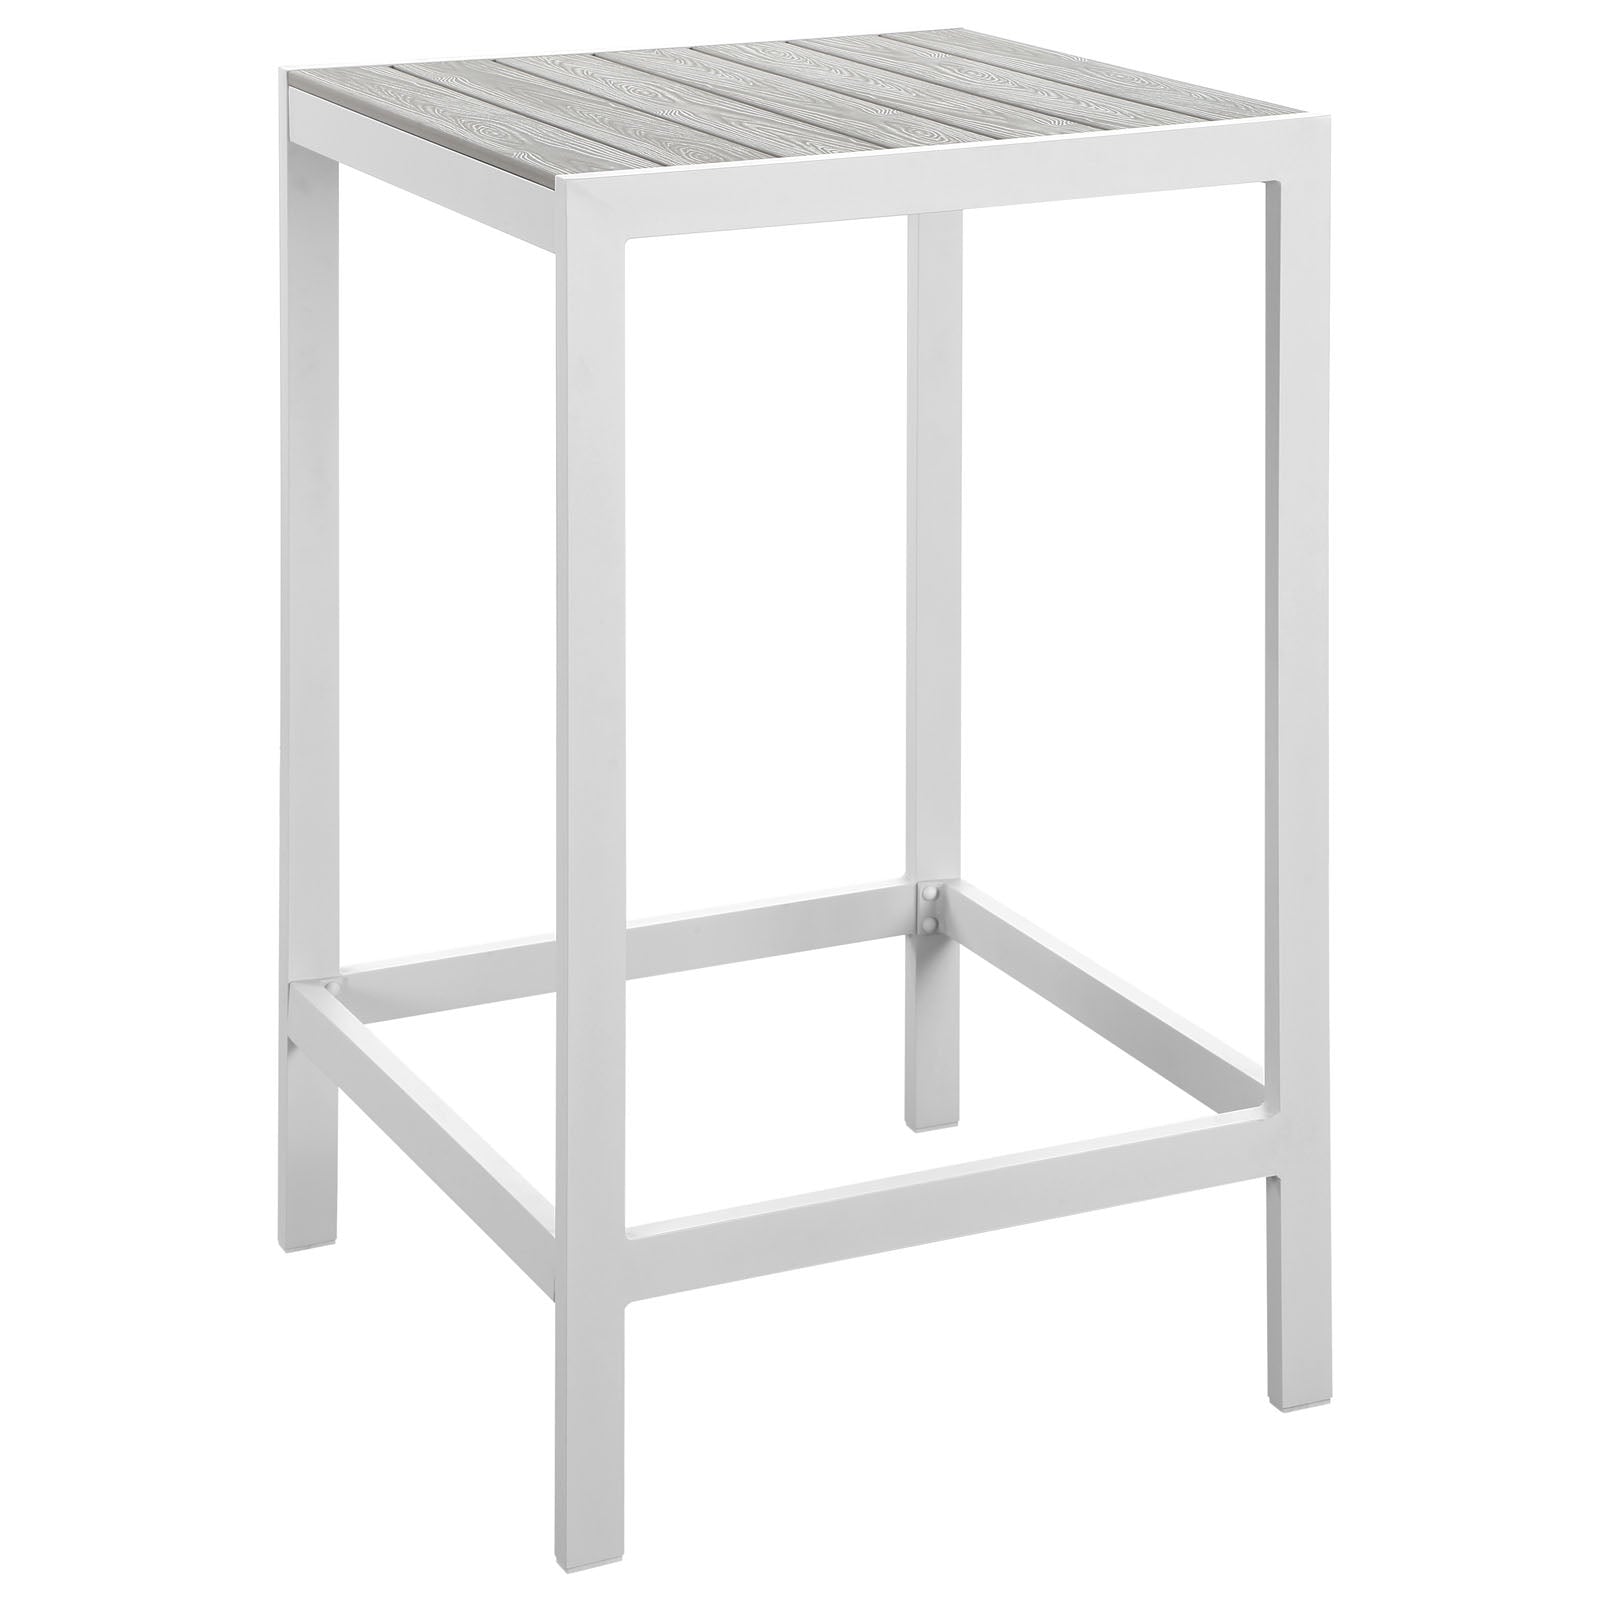 Modway Outdoor Bar Tables - Maine Outdoor Bar Table White & Light Gray